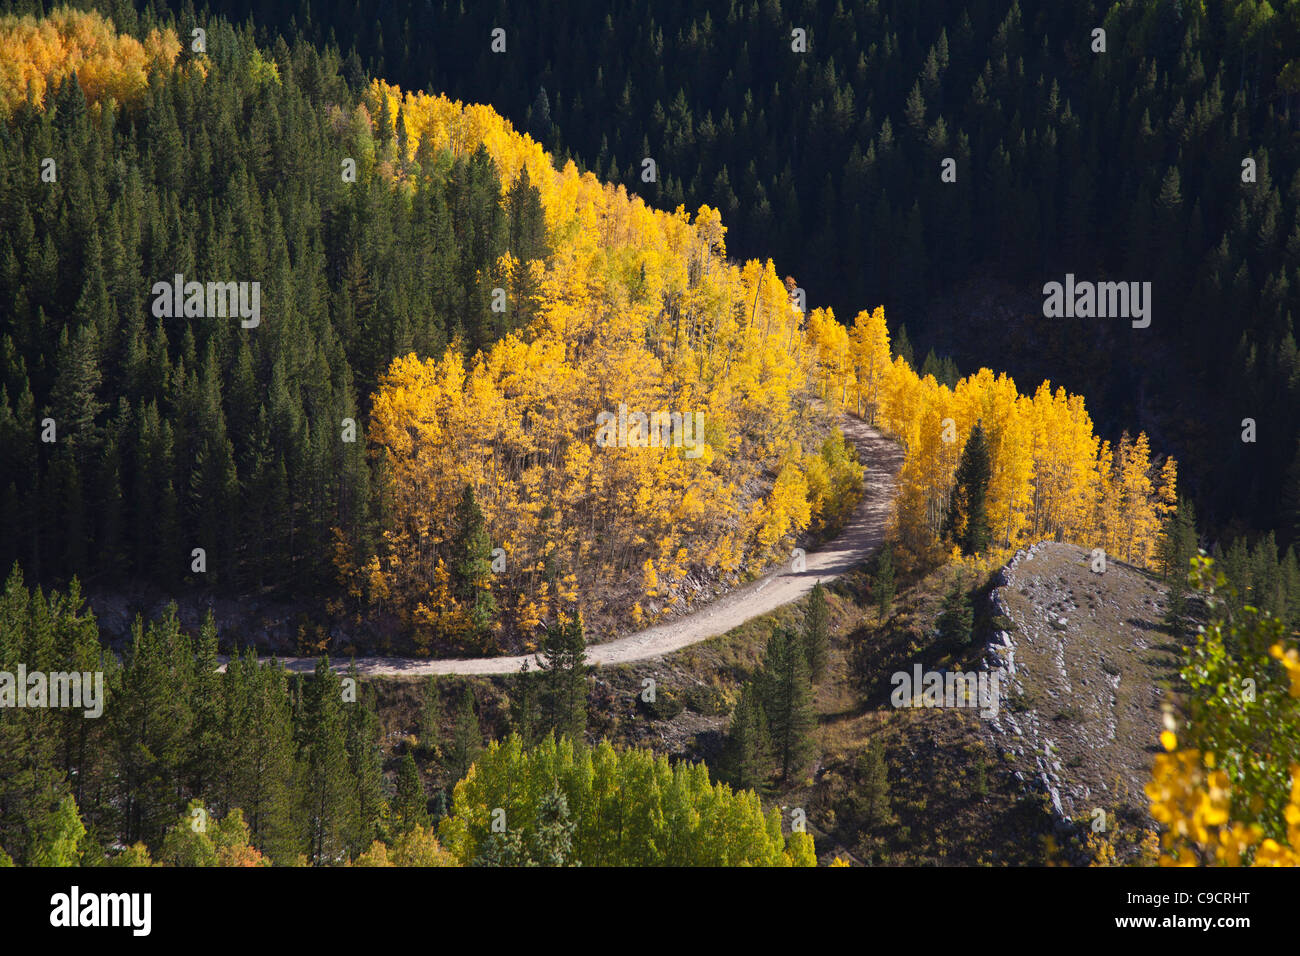 Autumn color along the Million Dollar Highway (US 550) portion of the San Juan Skyway Scenic Byway in Colorado overlooking the Lime Creek Road. Stock Photo